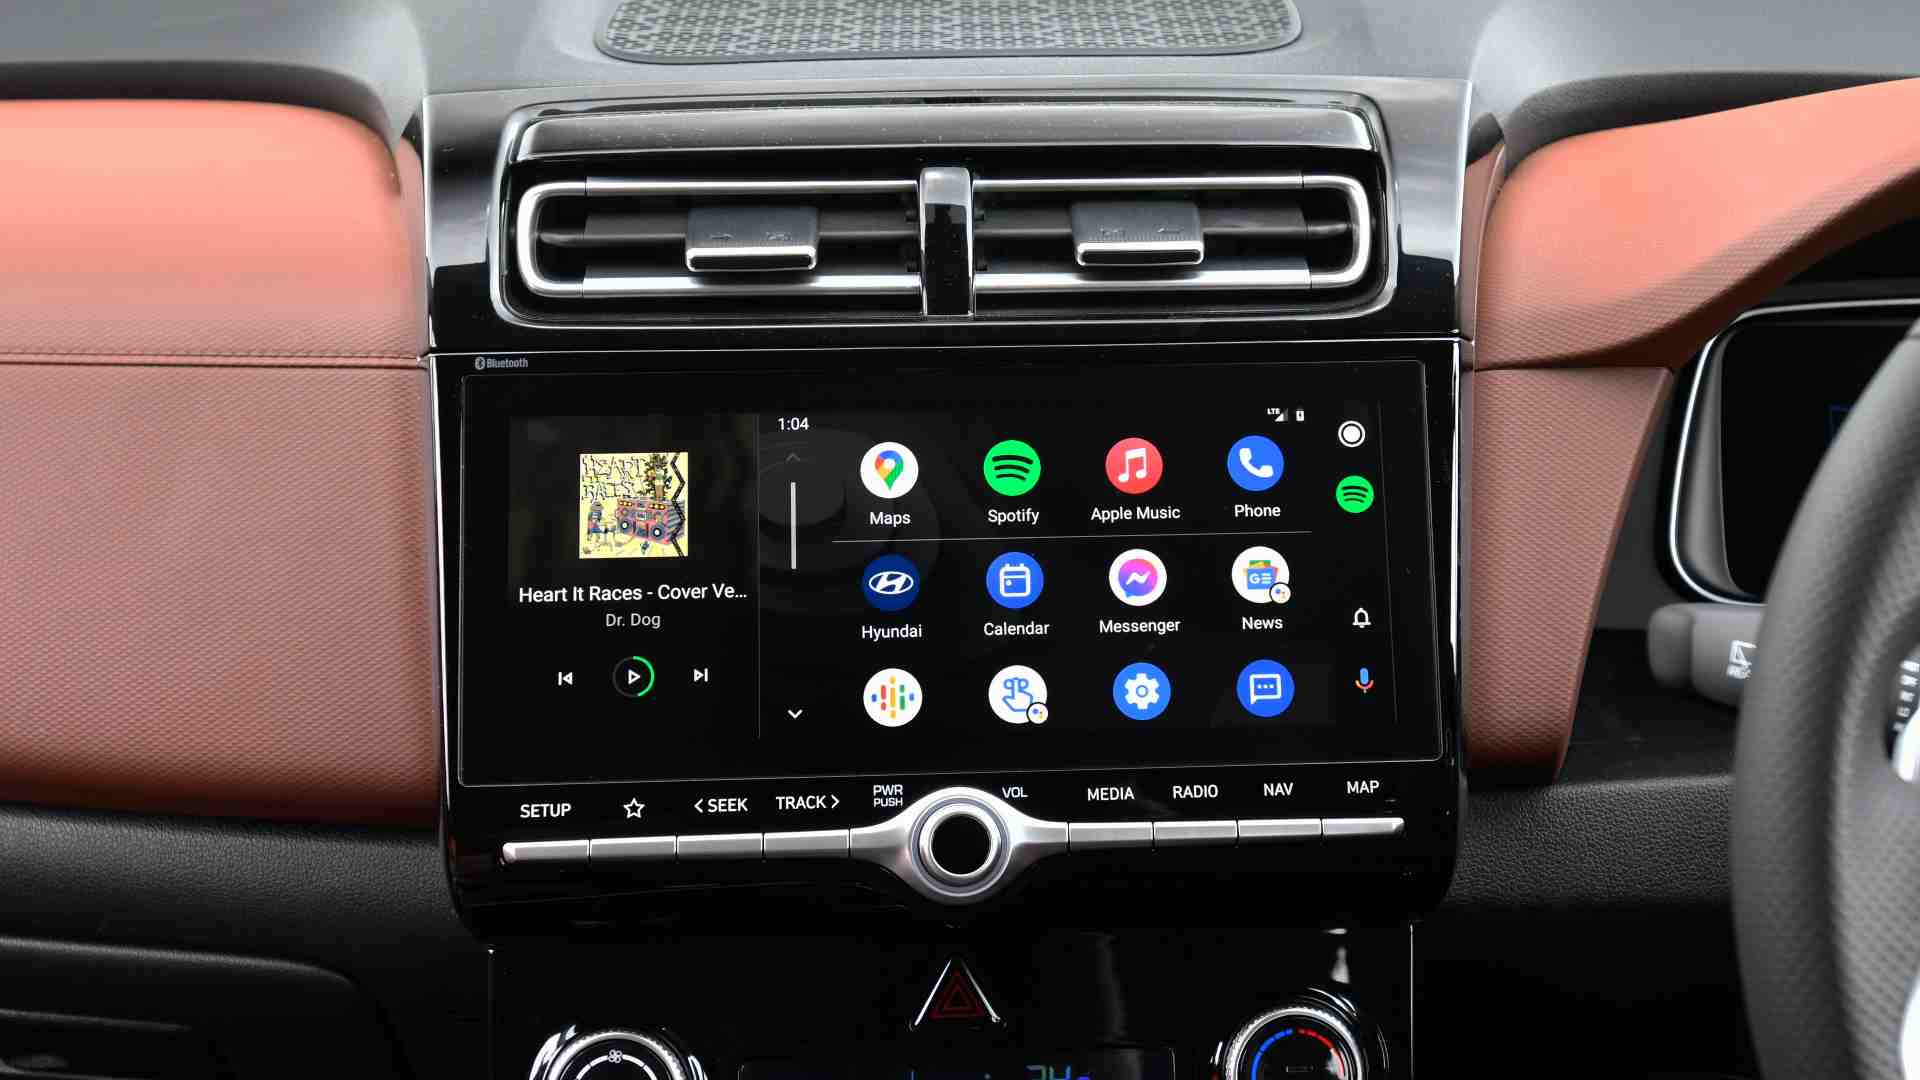 10.25-inch touchscreen is fluid and responsive, but icon layout a bit cluttered. Image: Hyundai